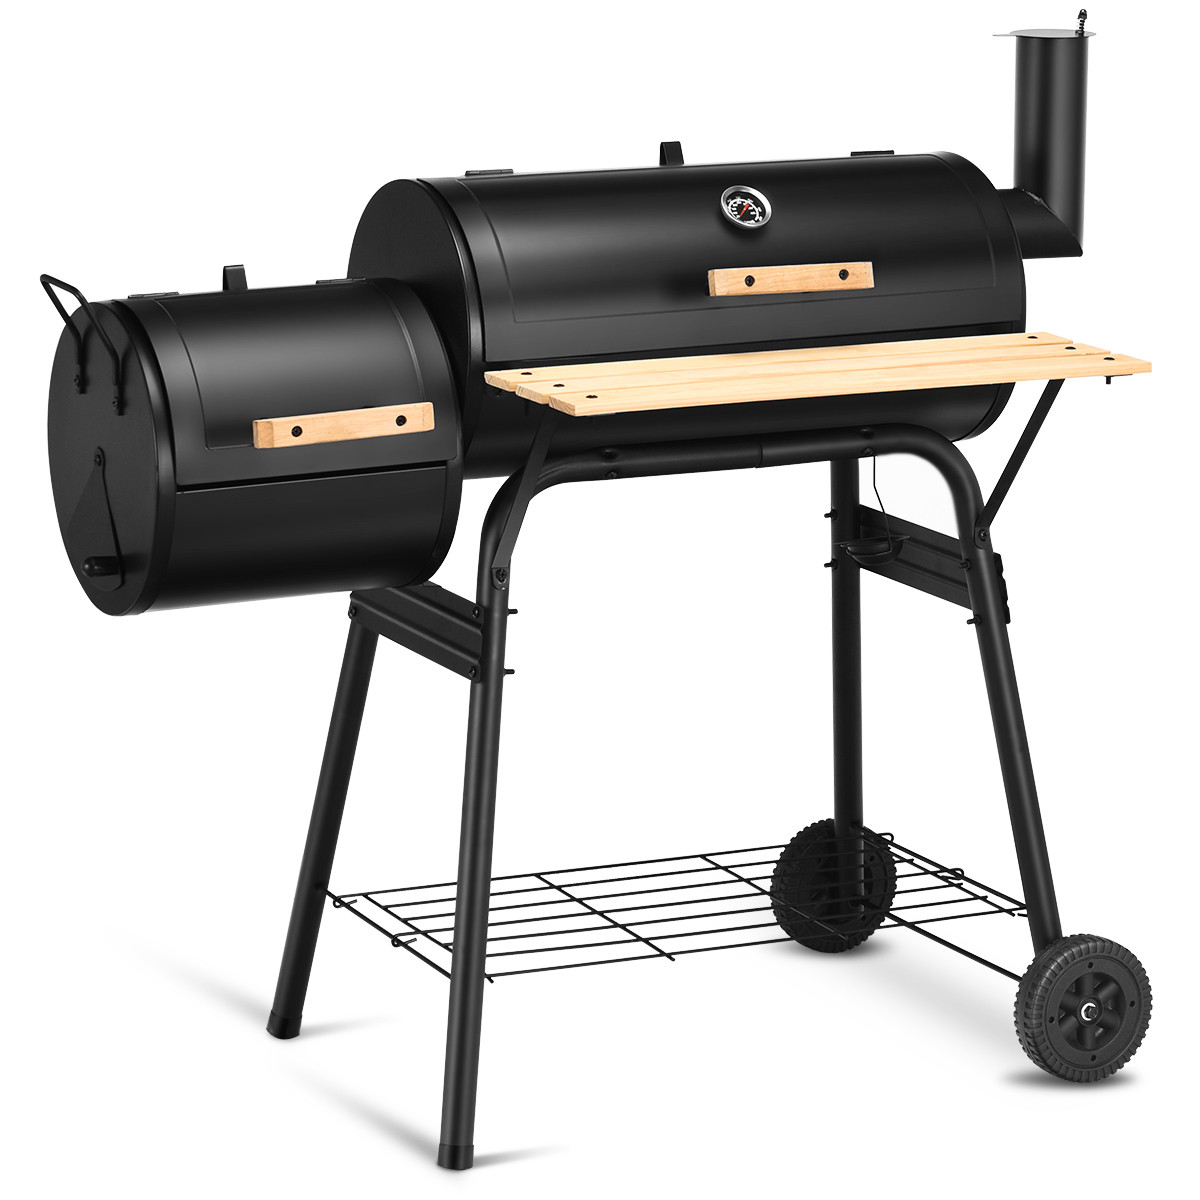 Backyard Grill Grills
 Costway Outdoor BBQ Grill Charcoal Barbecue Pit Patio